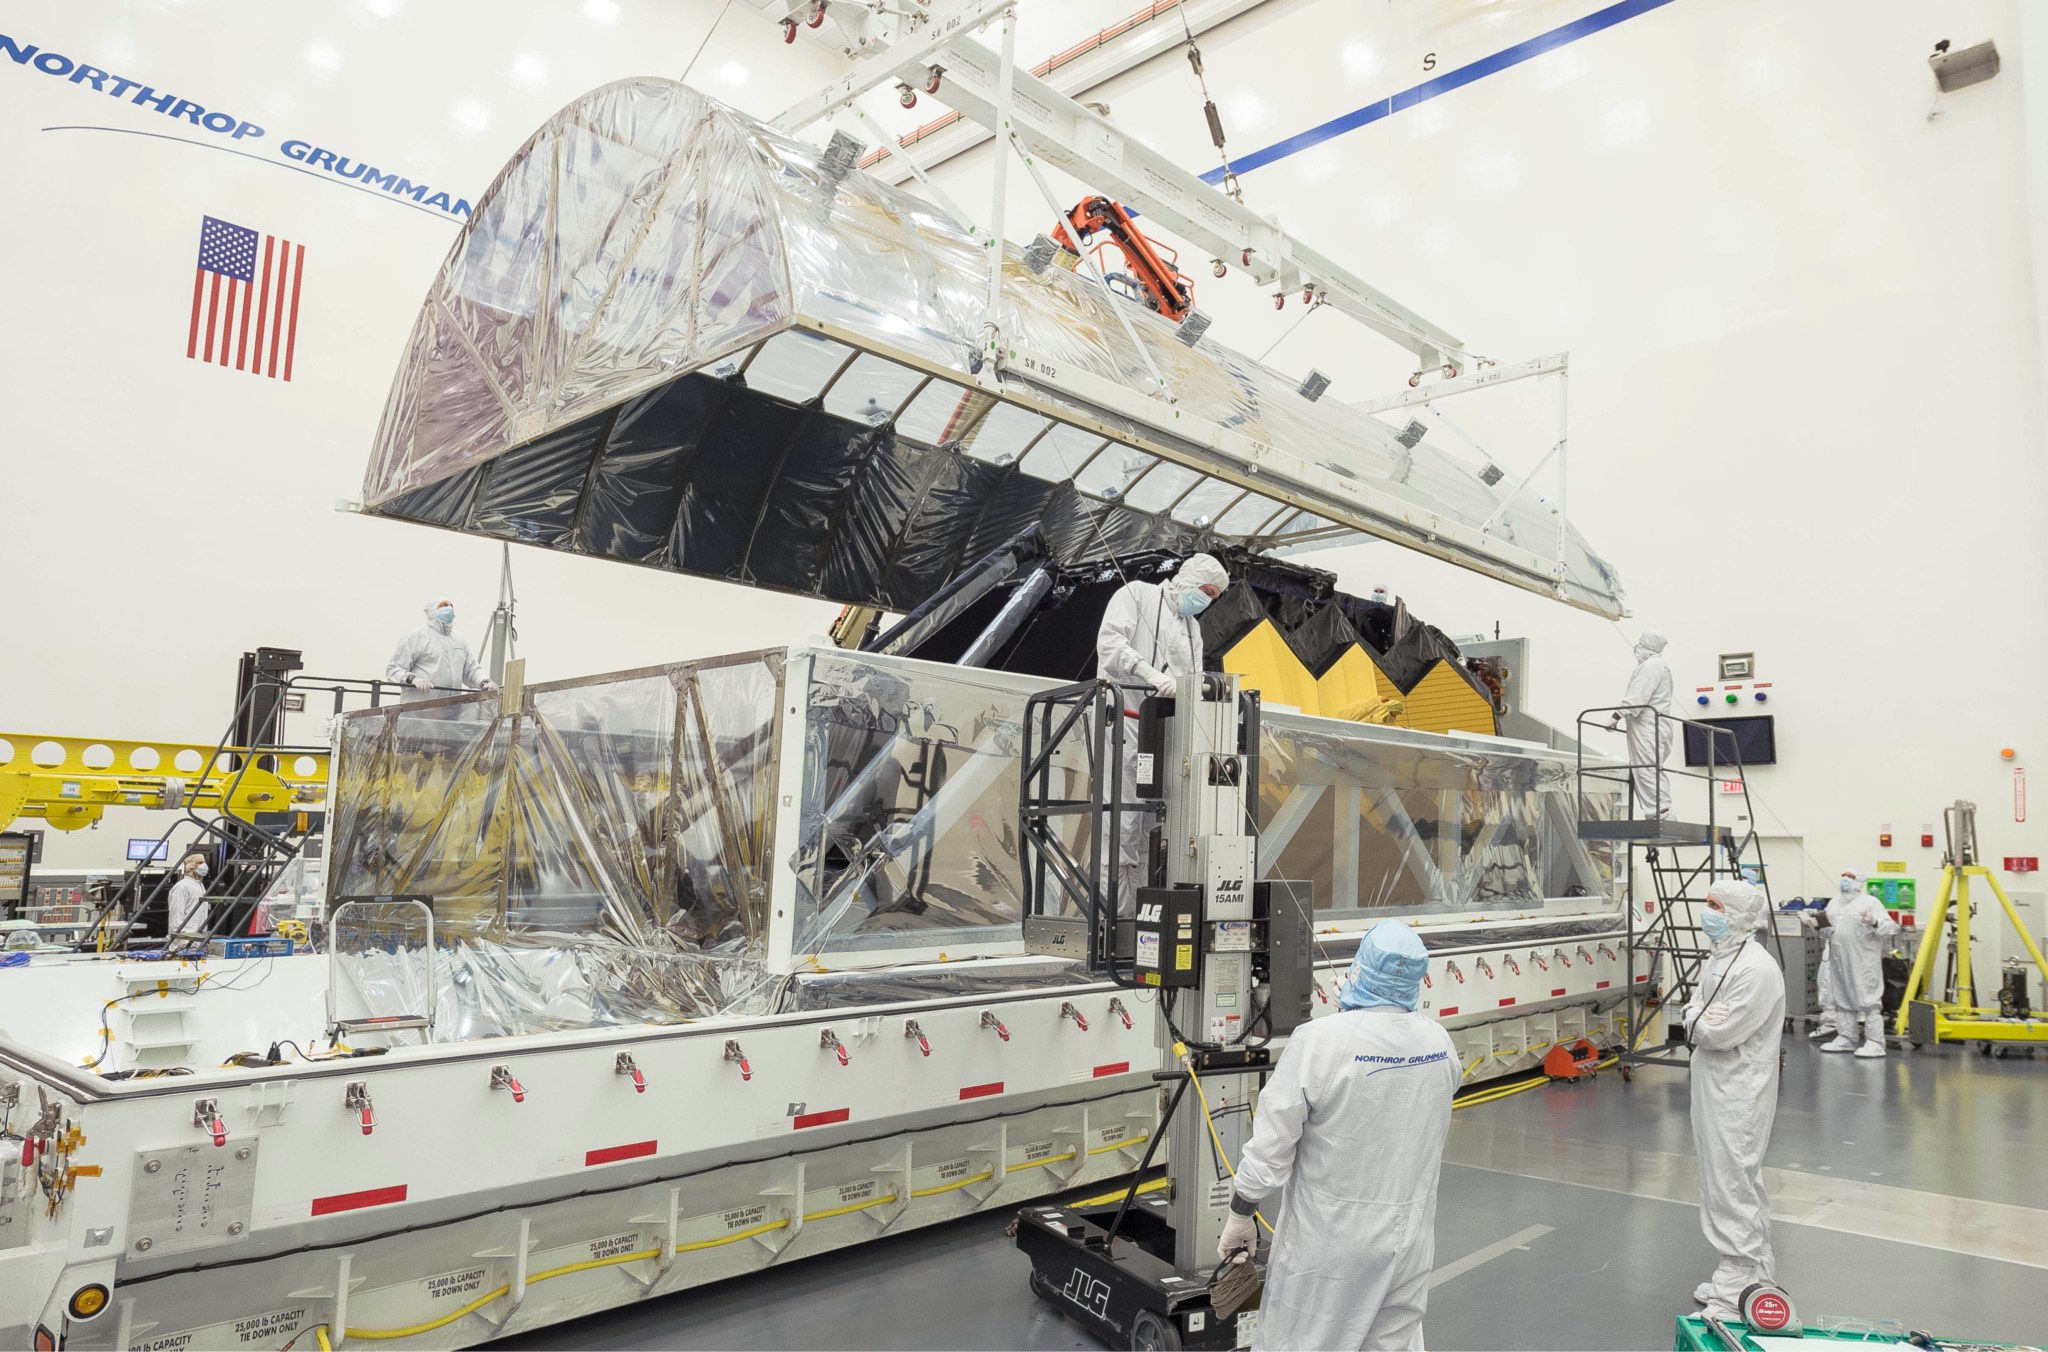 Engineers open the interior tent frame of the Space Telescope Transporter for Air, Road and Sea (STTARS) at Northrop Grumman.